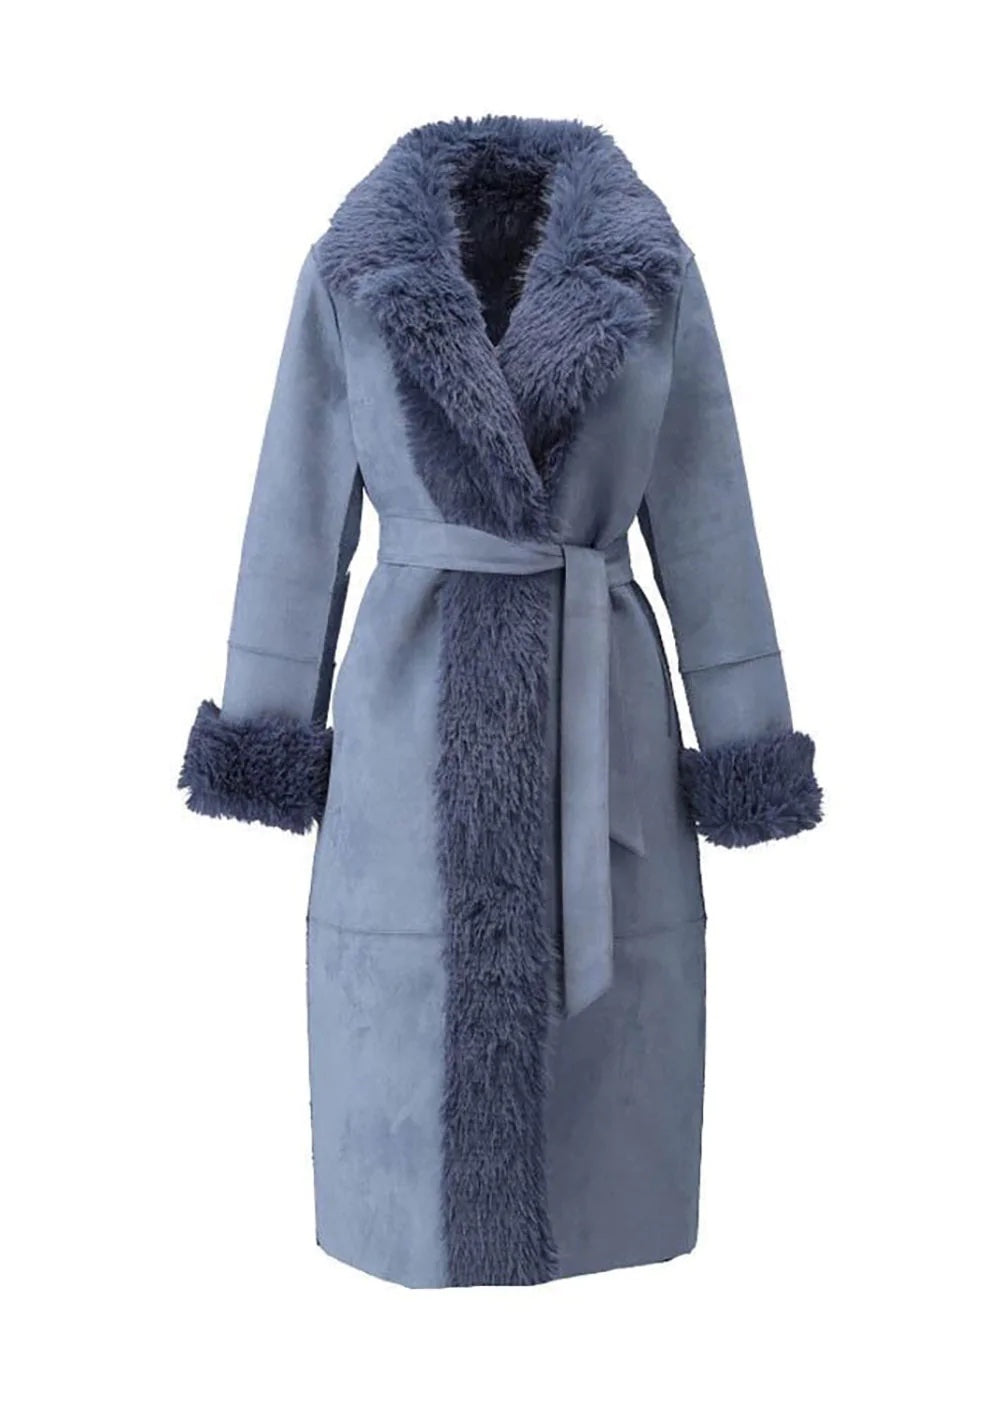 Light blue reversible luxury women's coat with faux fur and suede and a matching belt by K-design women fashion